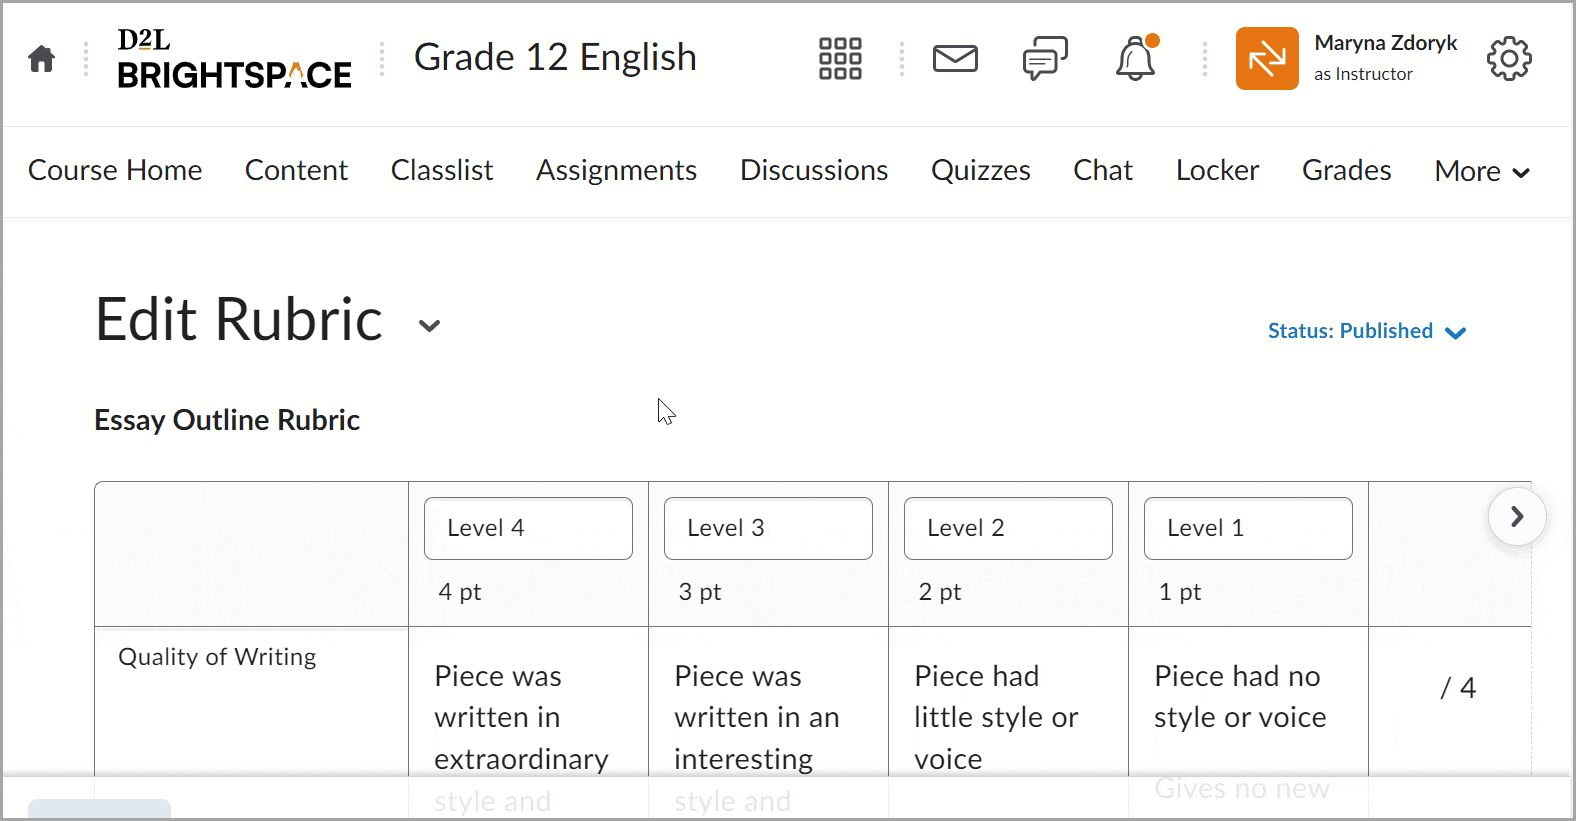 The Edit Rubric window with changes highlighted and indicated with the word Edited.